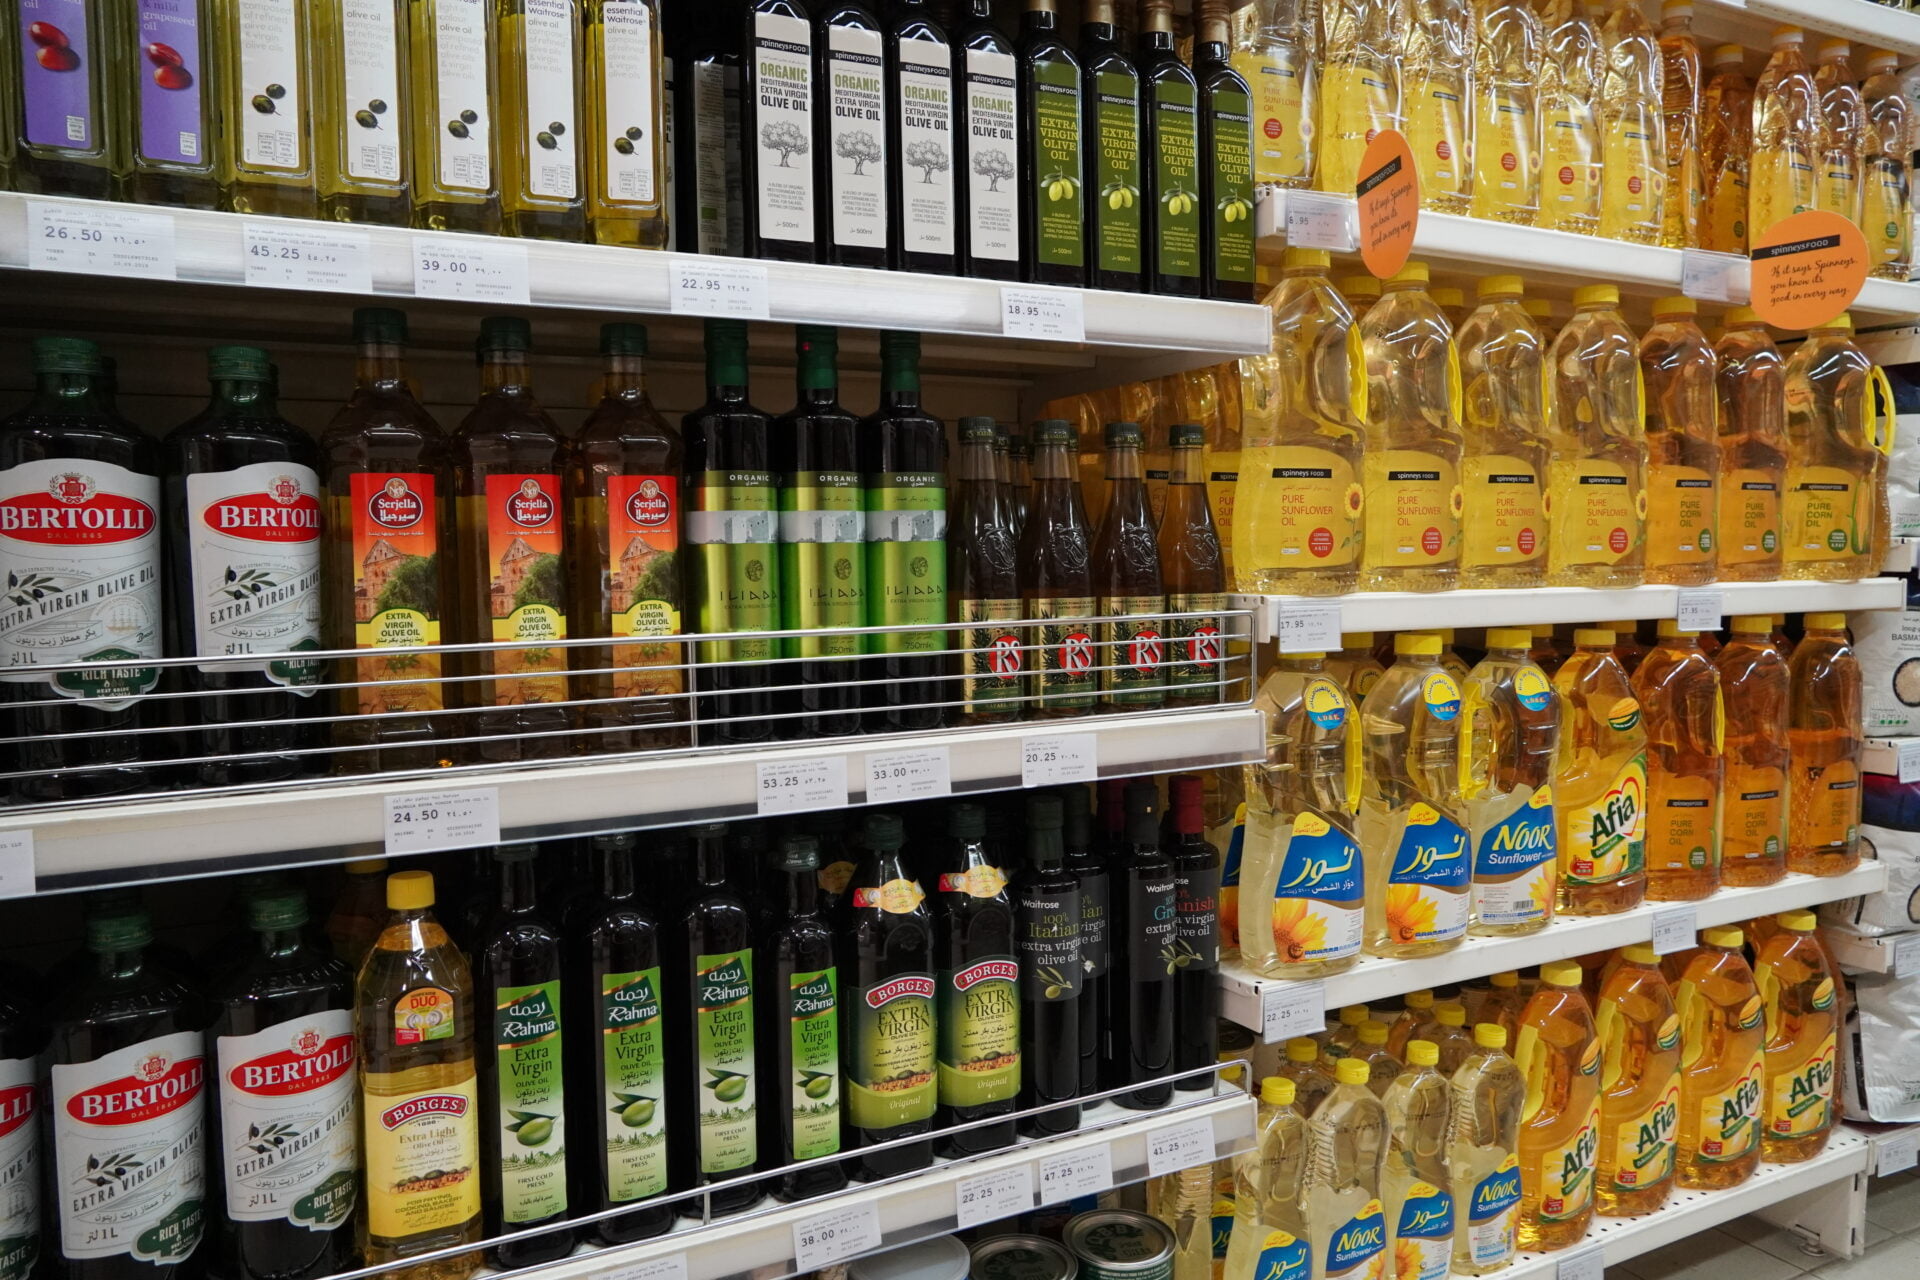 Bottles of cooking oils for sale. Corn, sunflower, extra virgin olive oils. Rows of high quality healthy cooking oil. Variety brand of cooking oil on display rack